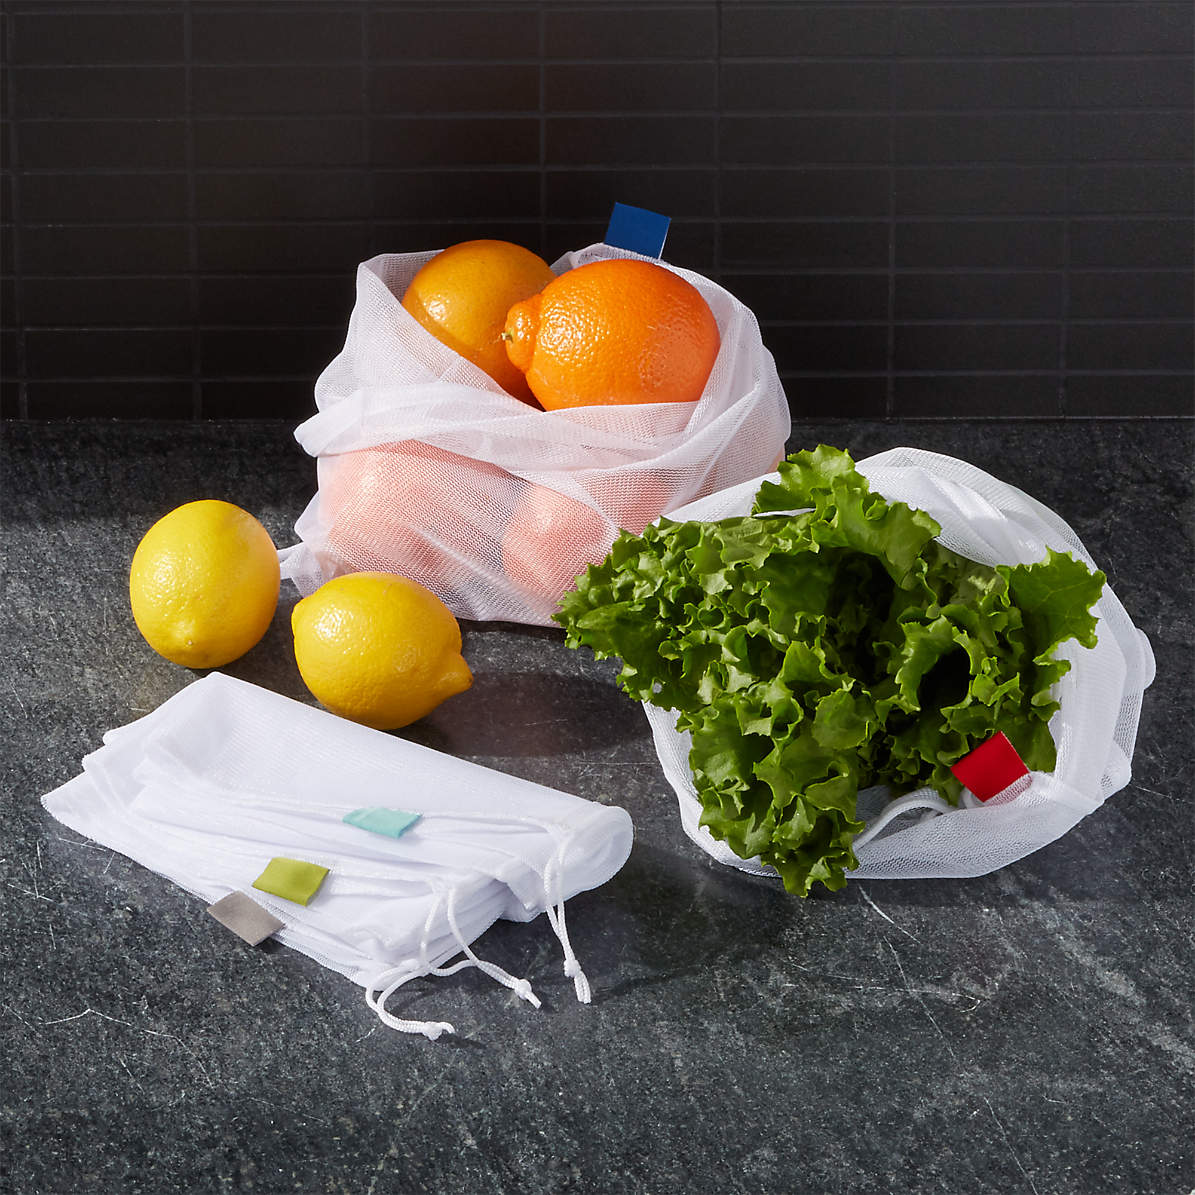 Cotton Mesh Bag Manufacturer,Cotton Mesh Bag Supplier and Exporter from  Kanpur India